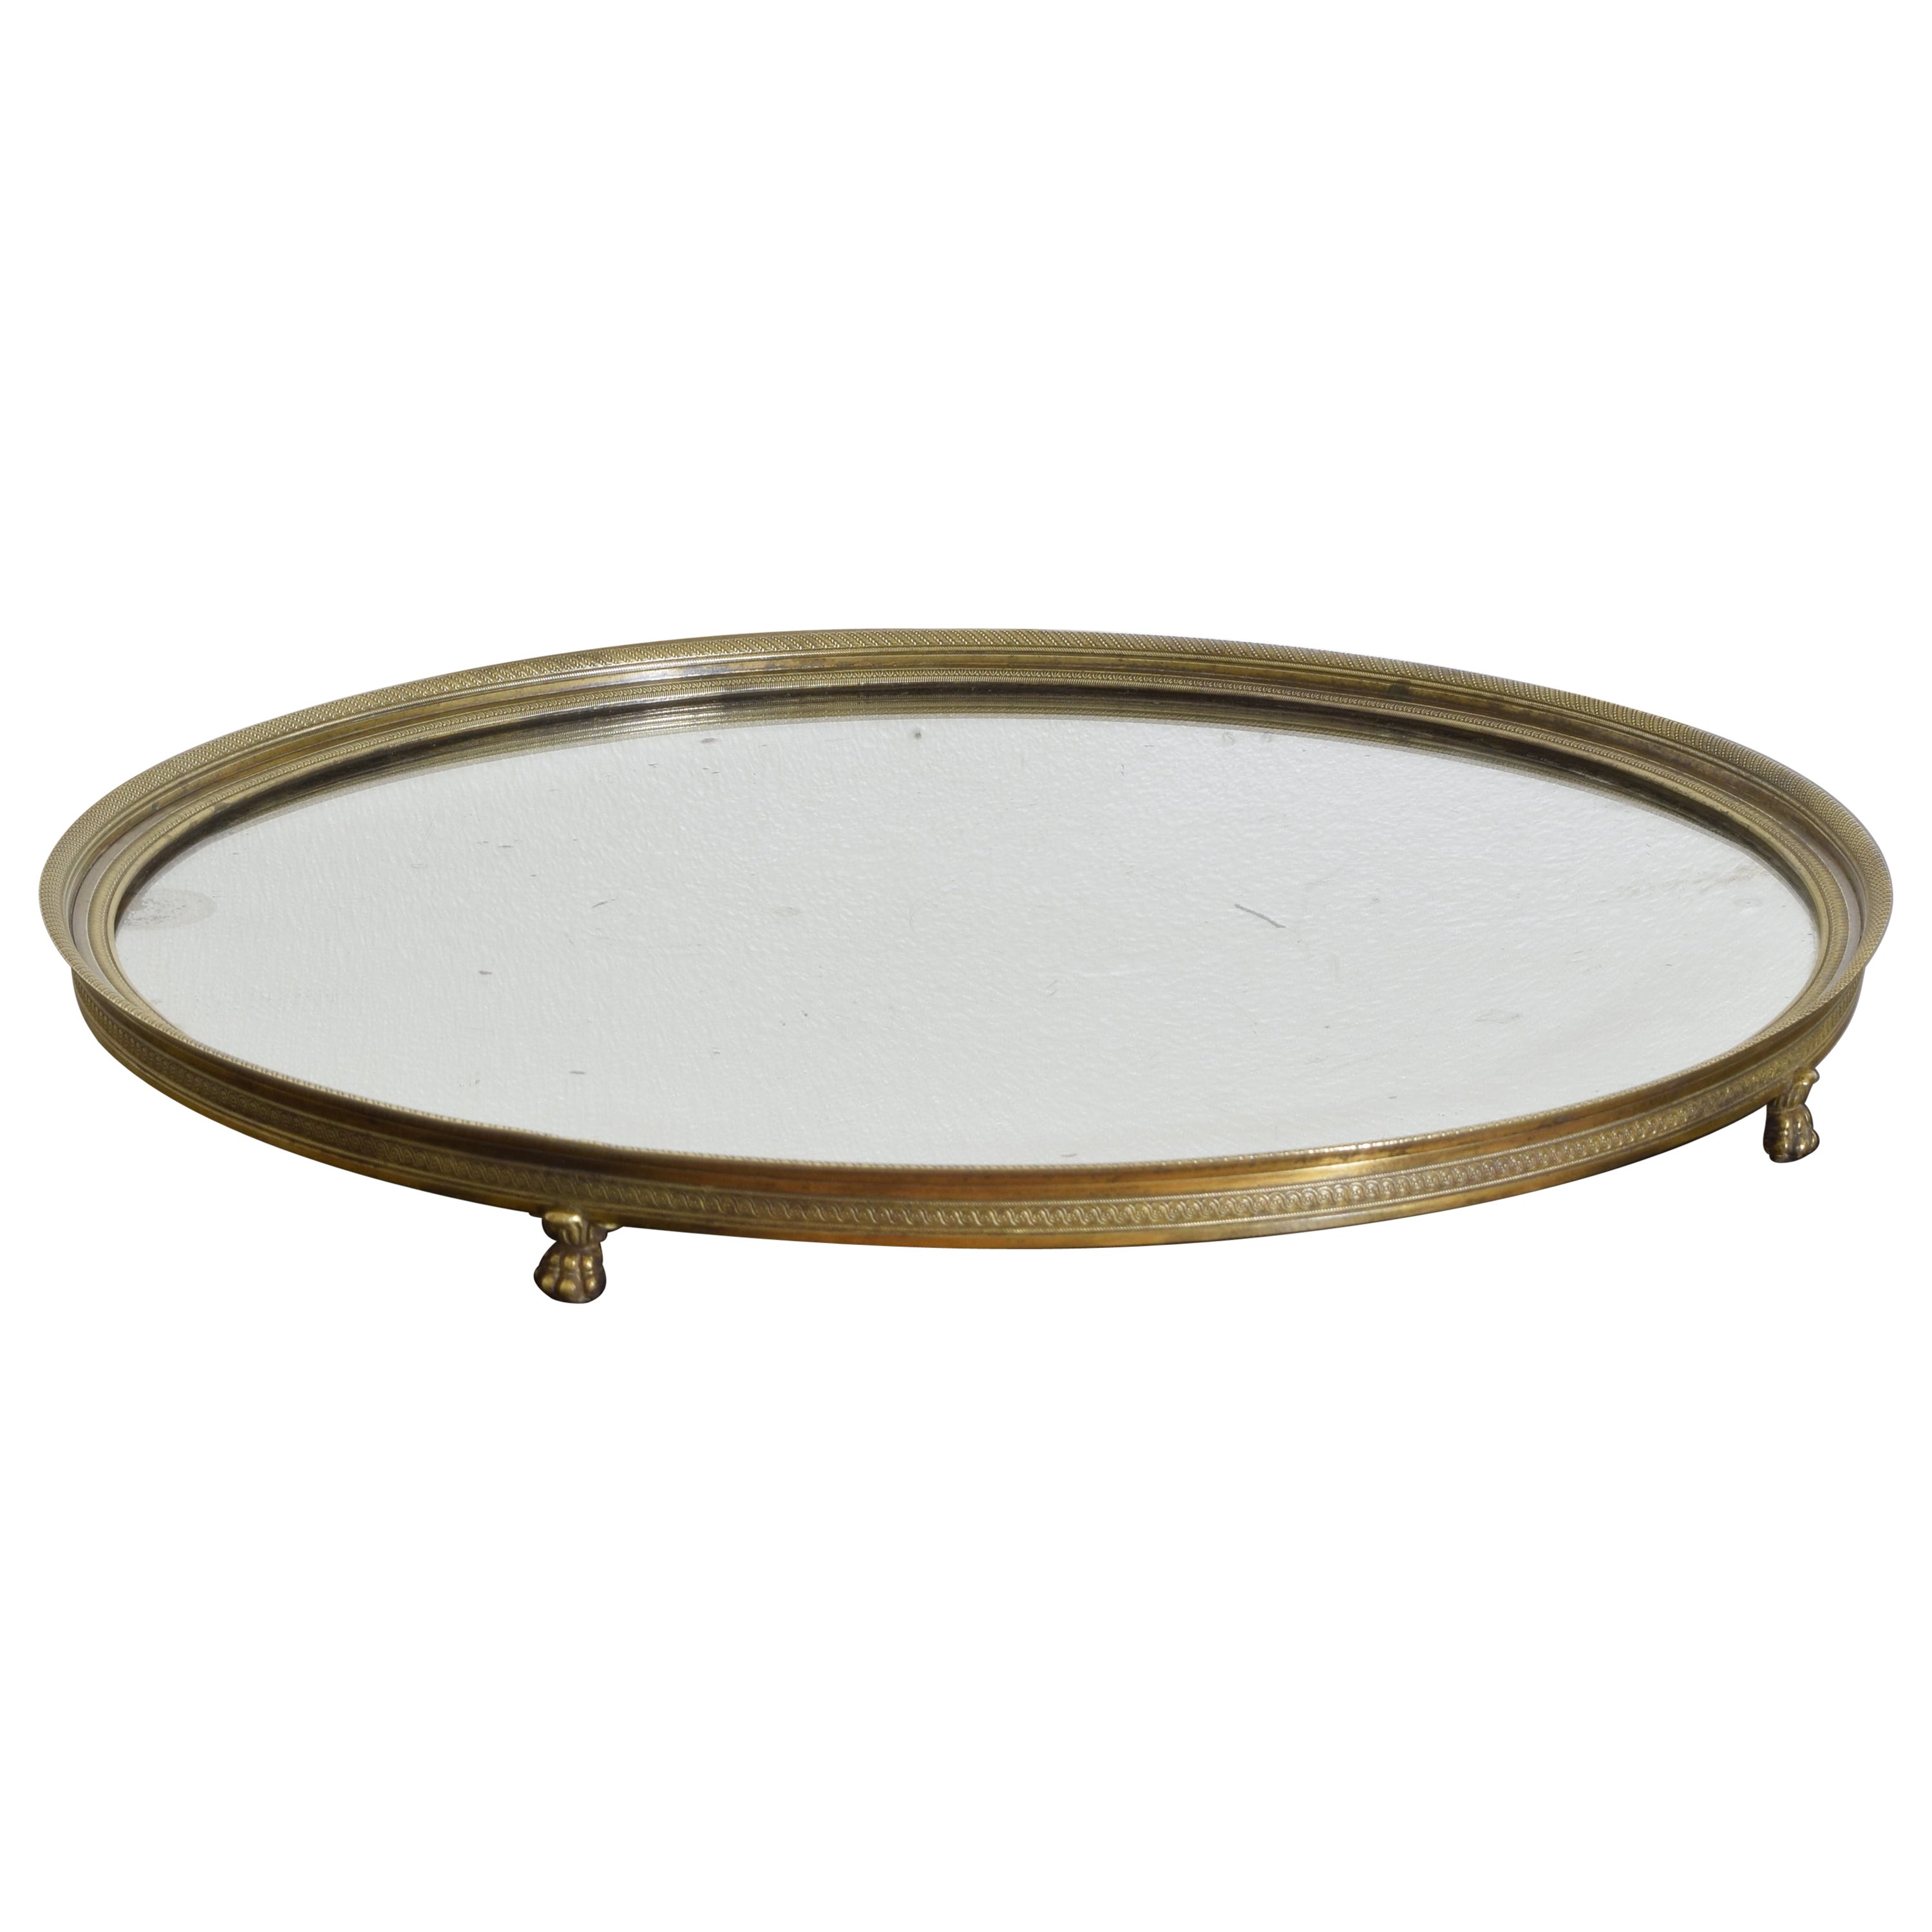 French Empire Period Circular Brass & Mirrored Footed Plateau, Early 19th Cen For Sale